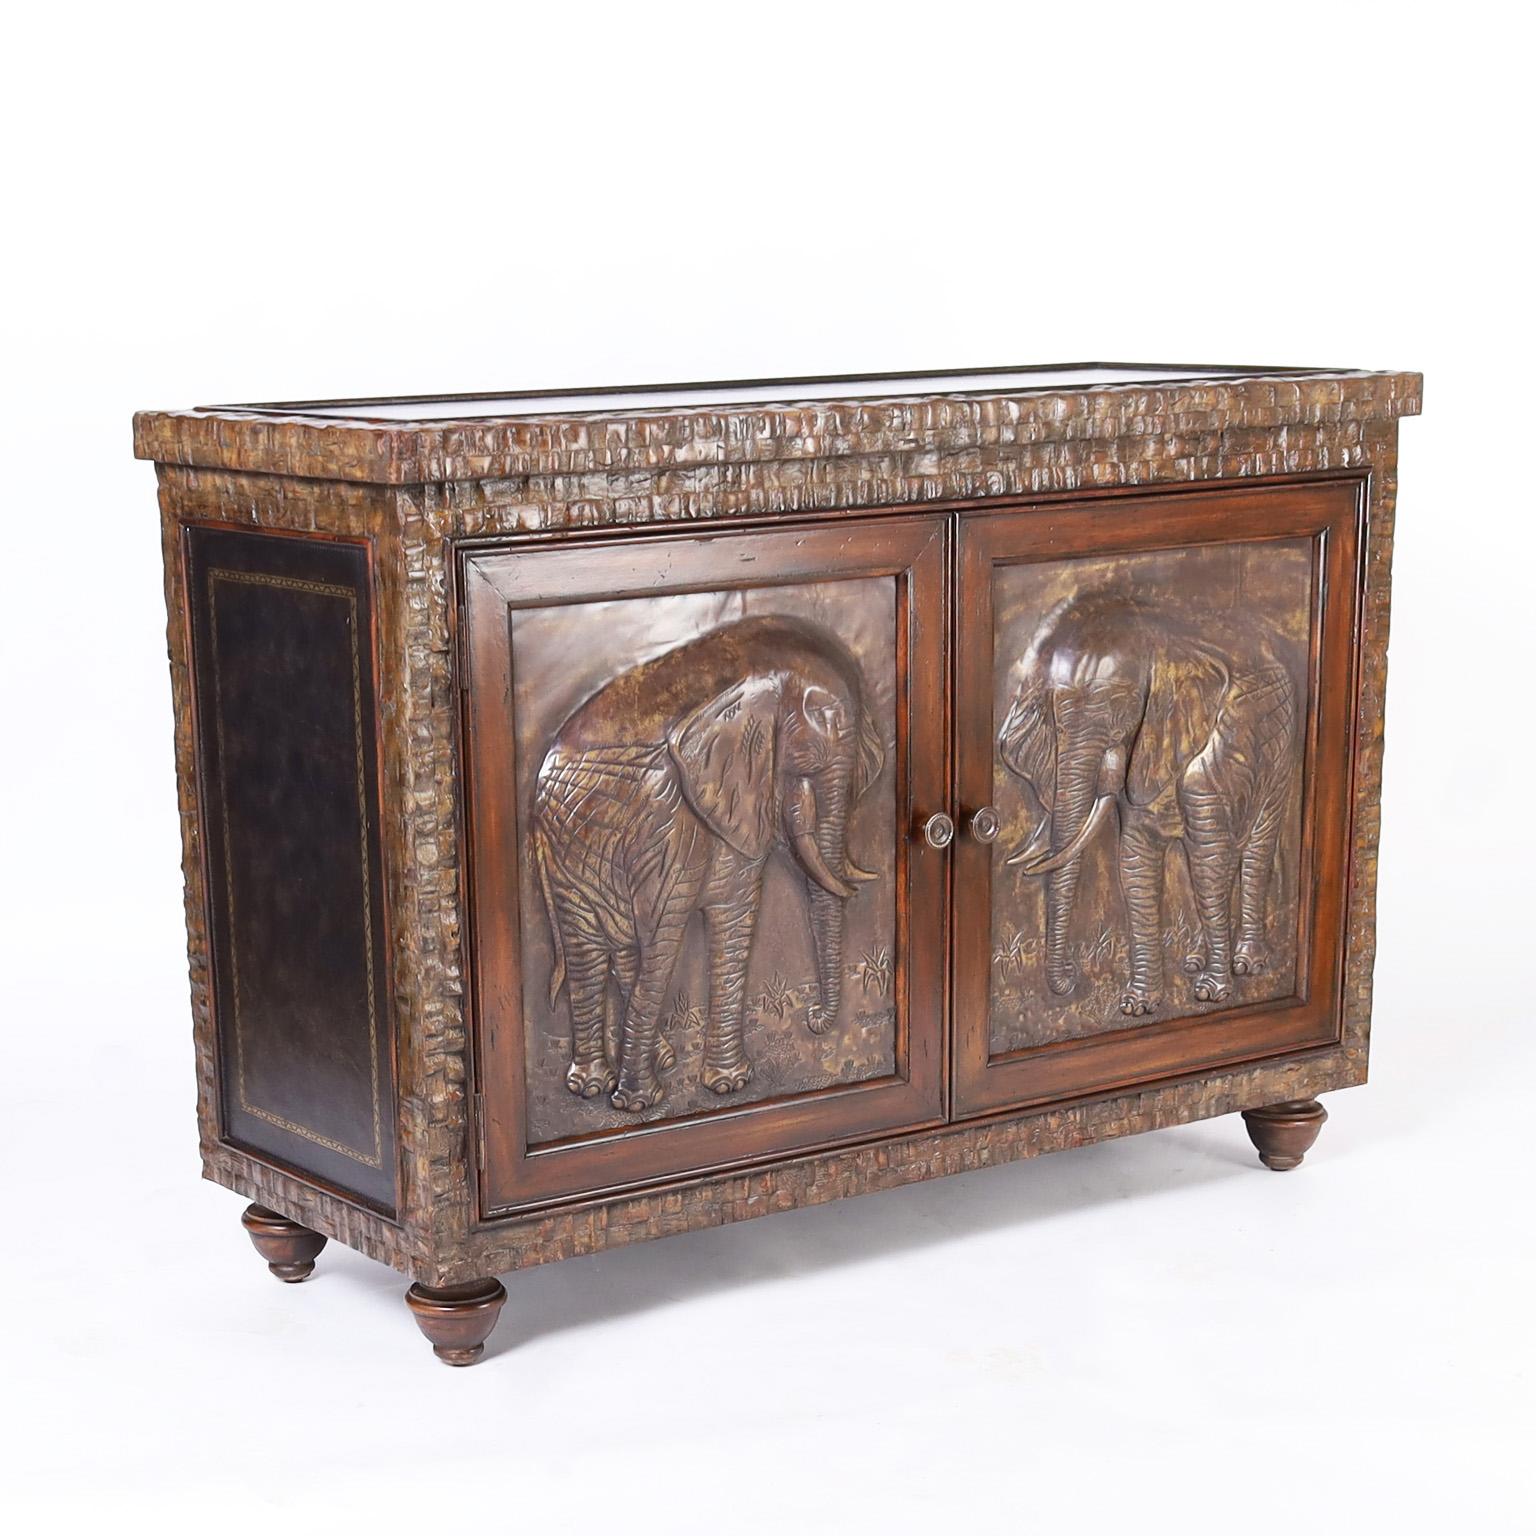 British Colonial Two Door Cabinet or Server with Elephants and Coconut Veneer